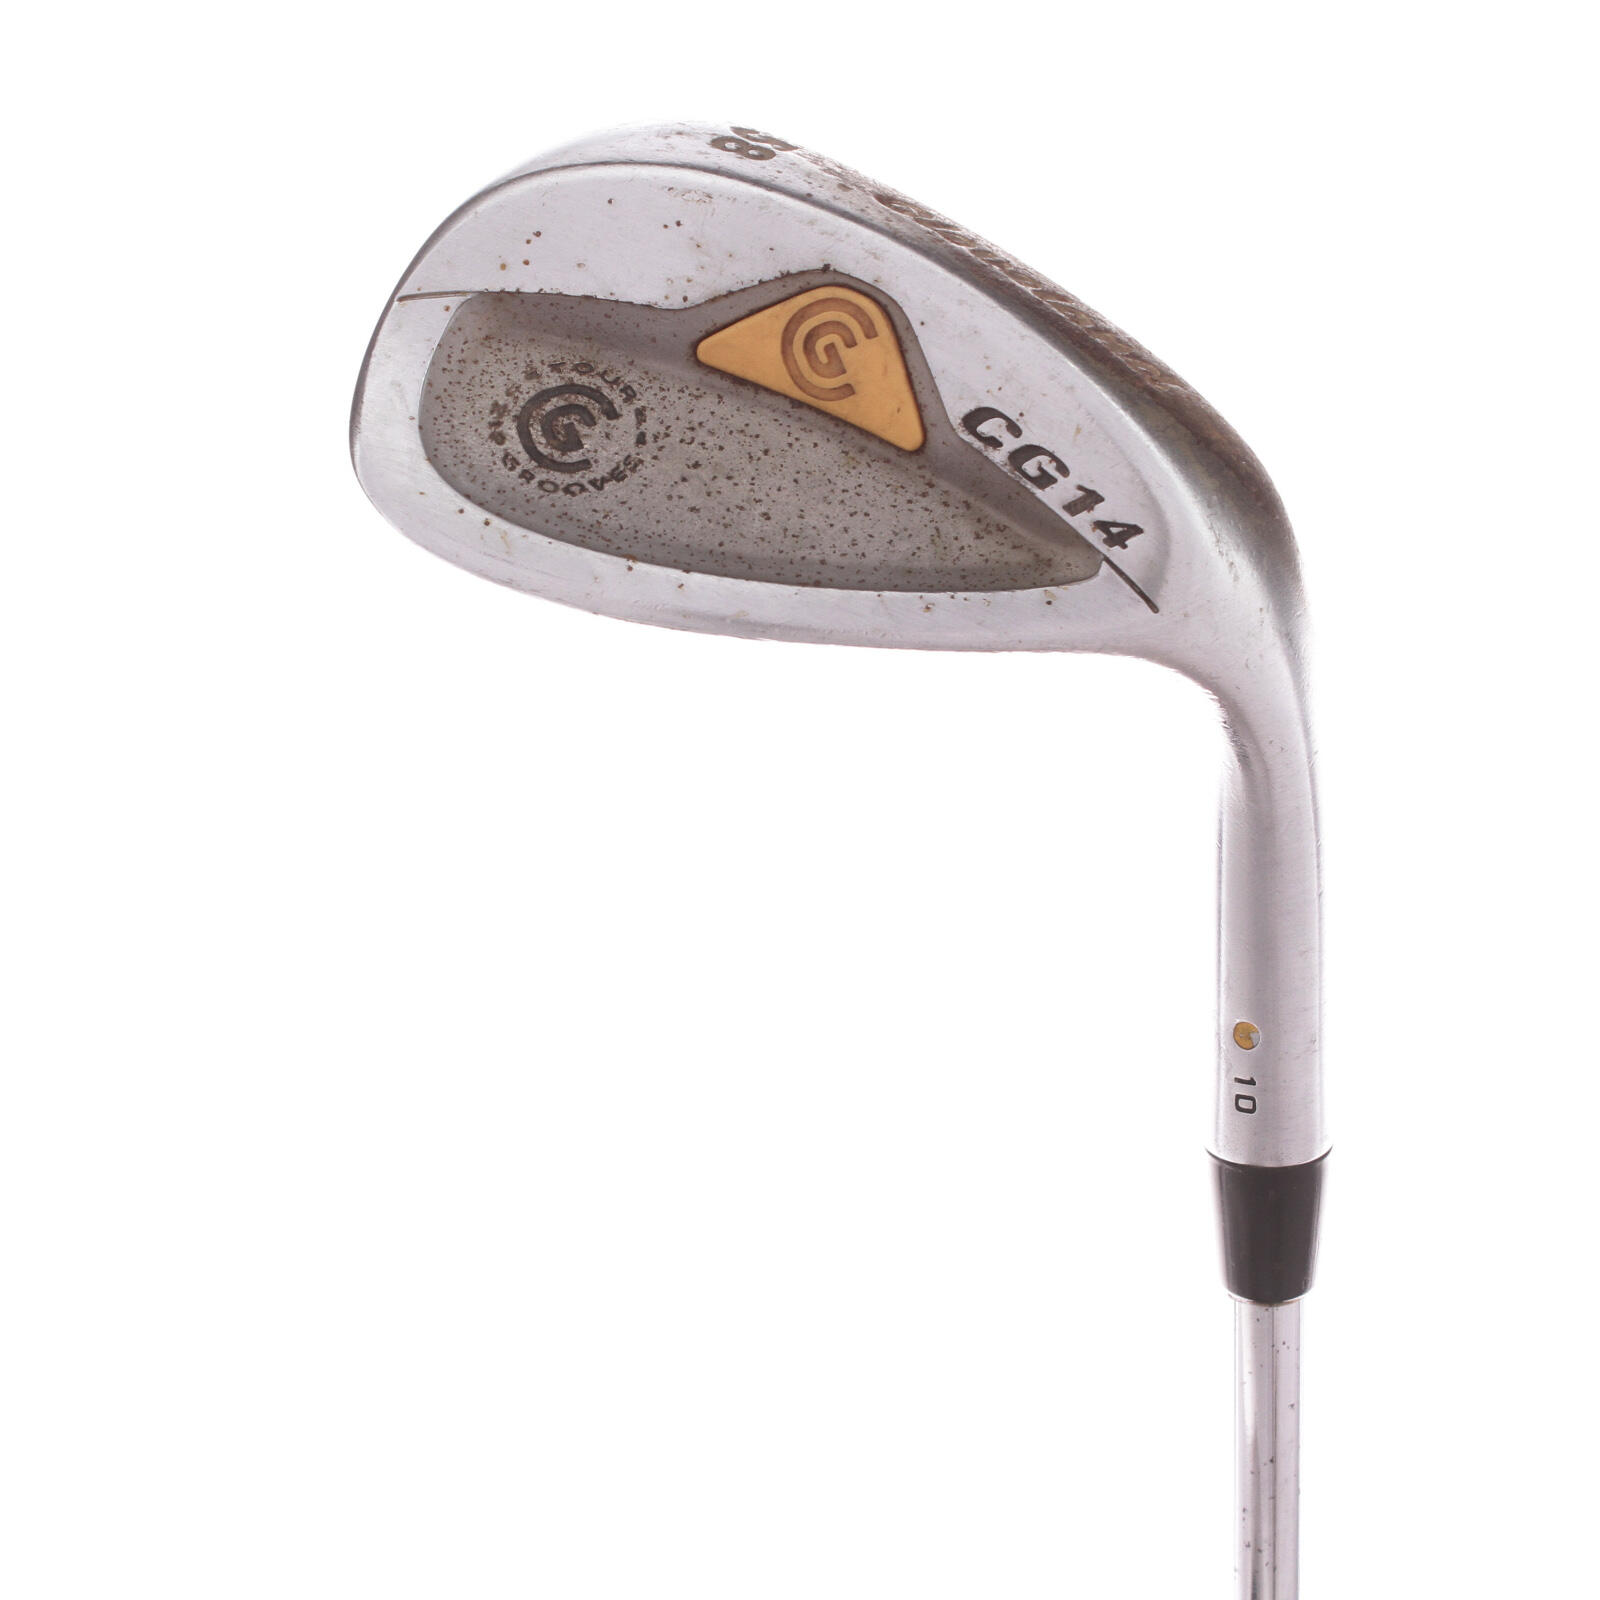 CLEVELAND GOLF USED - Approach Wedge Cleveland CG14 Zip Grooves 52* Steel Right Hand - GRADE D